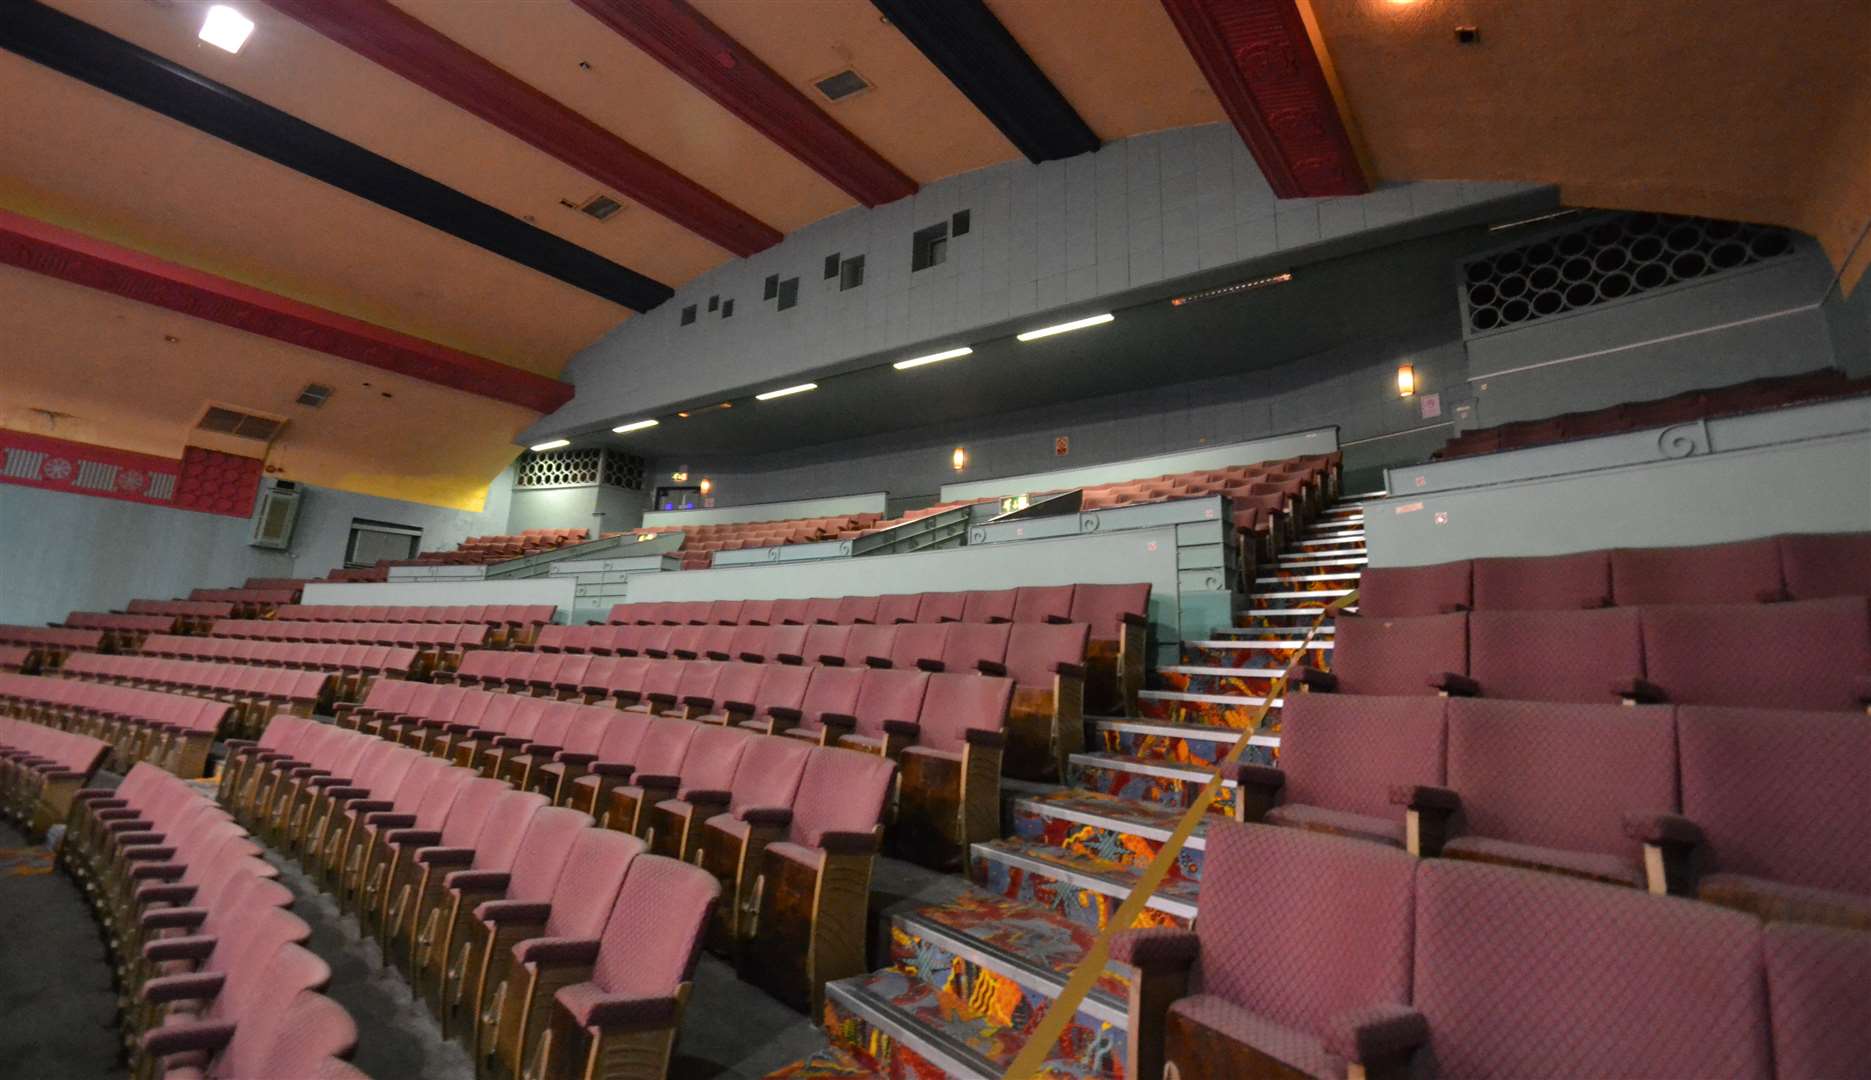 The former cinema seating was still in place when Mecca Bingo closed in 2018. Picture: Steve Salter